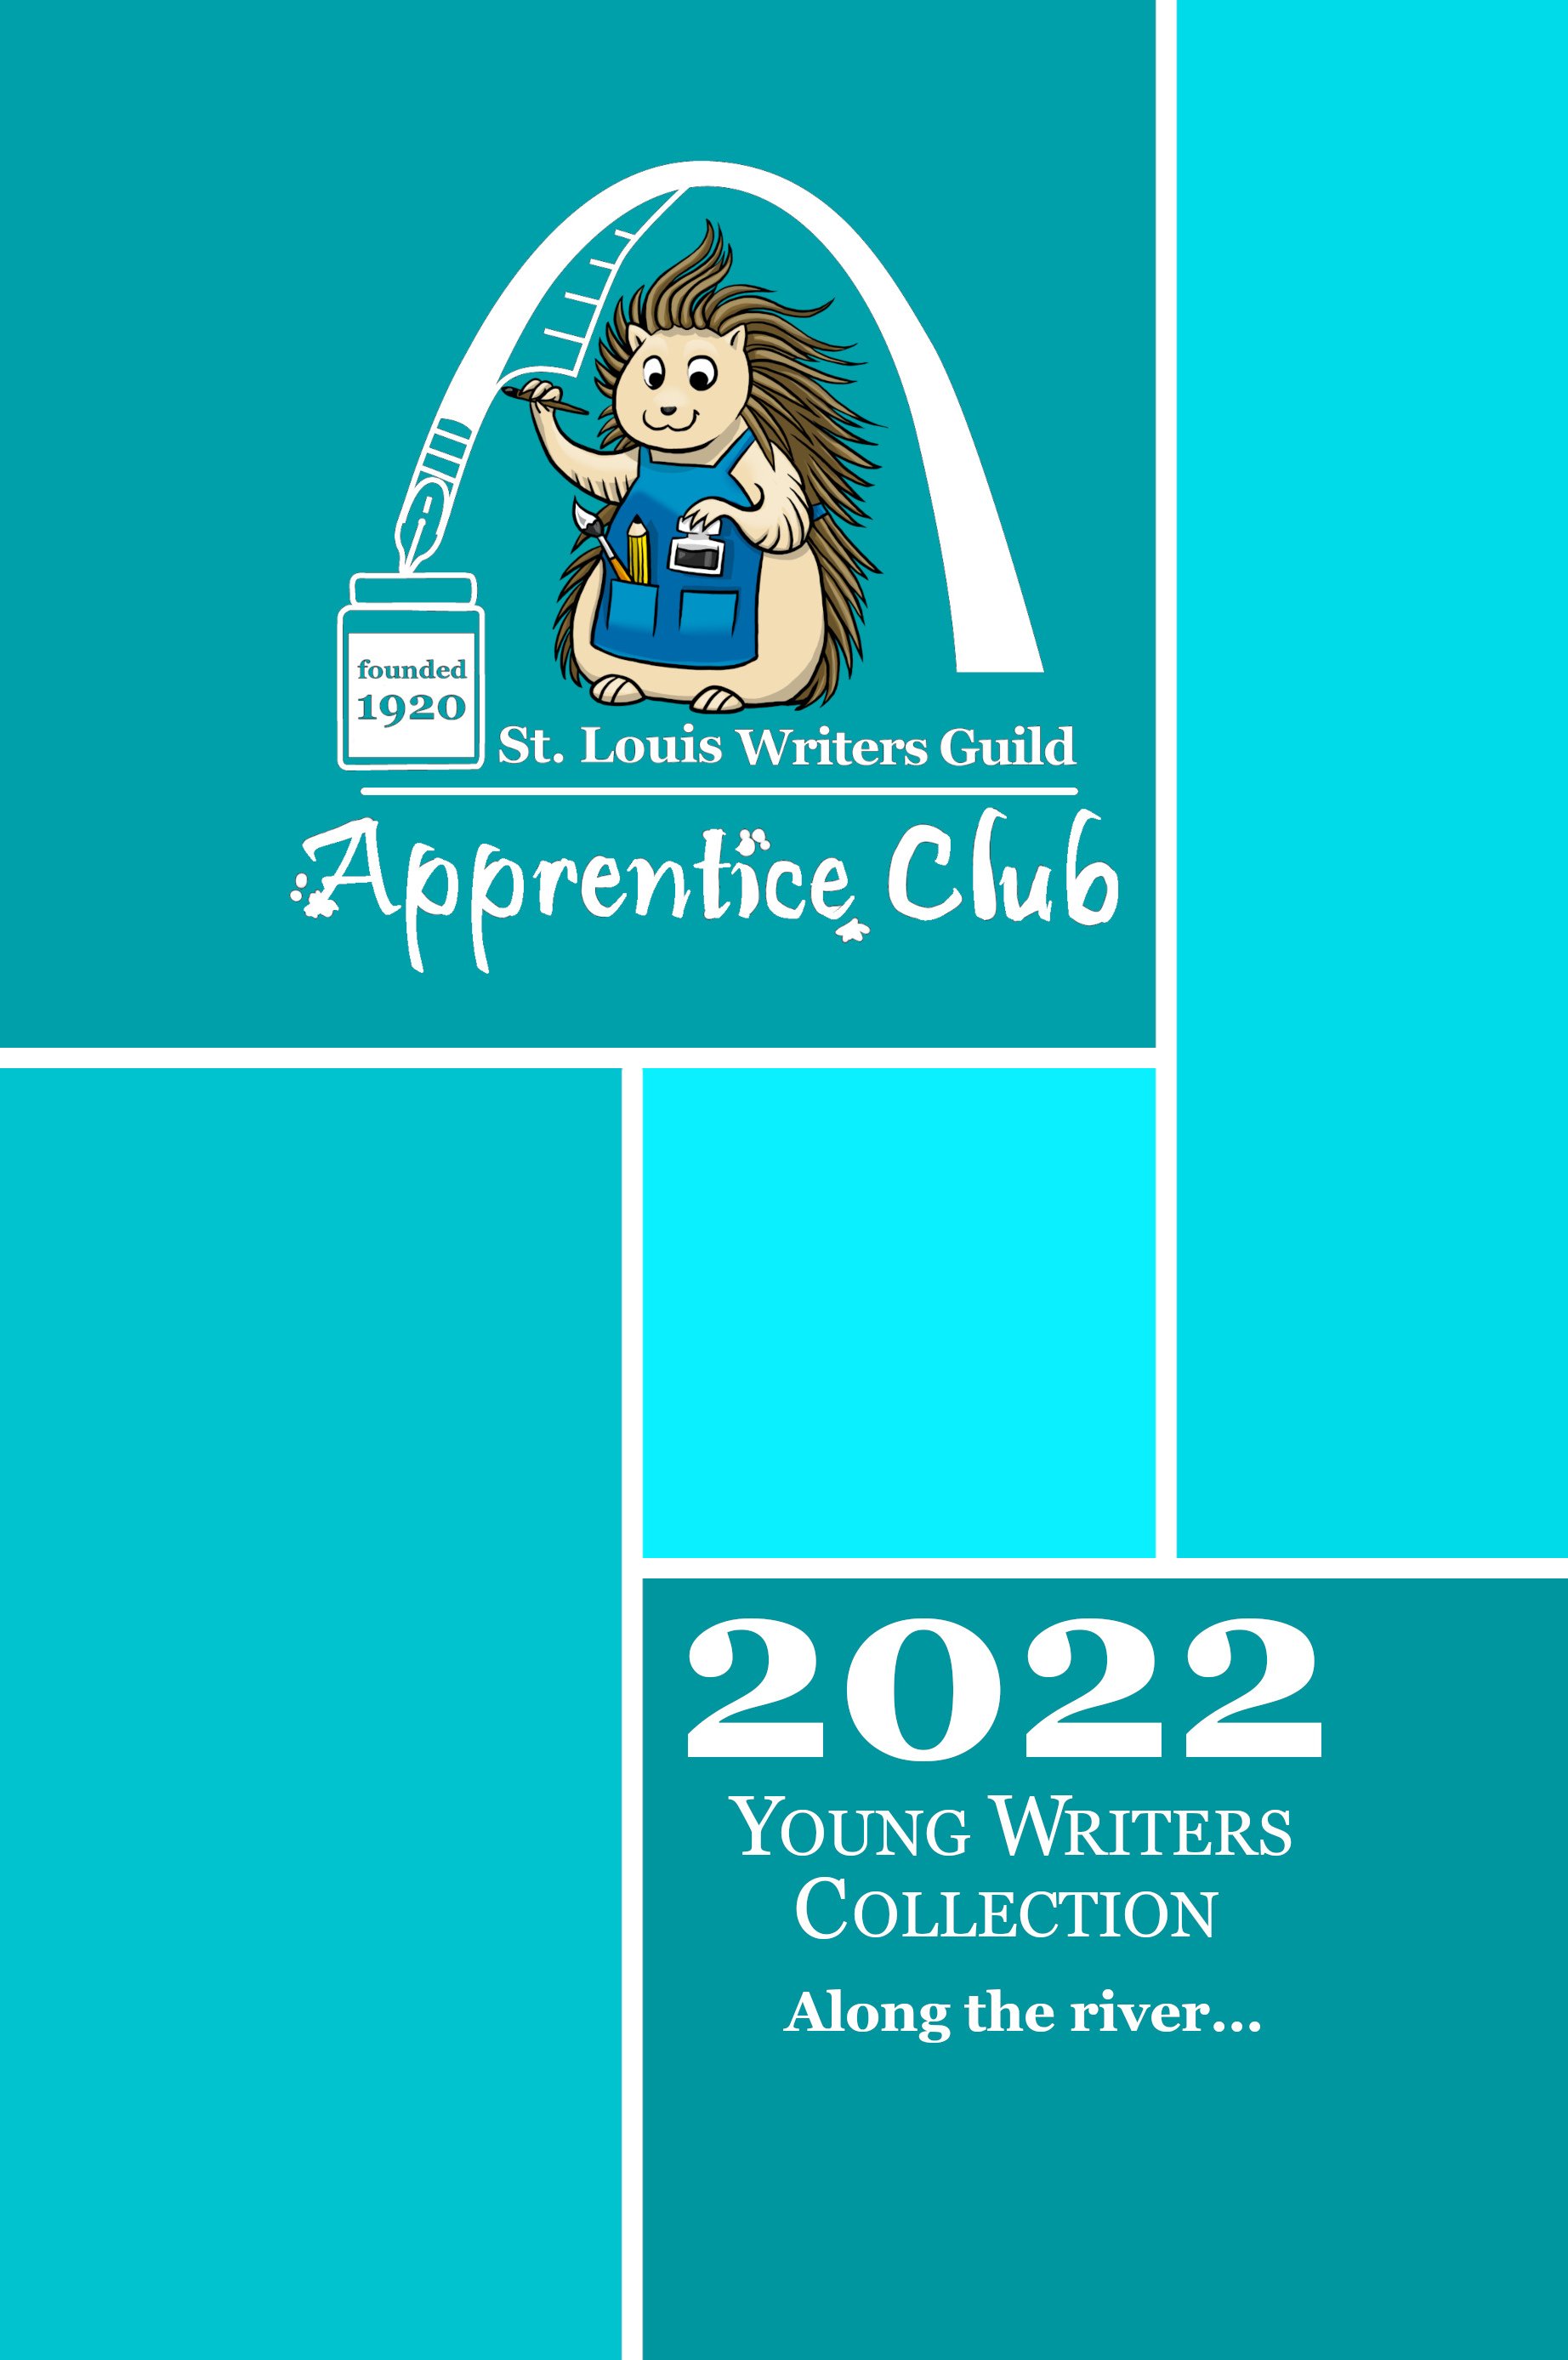 YWACollectionCover2022-FrontCover.jpg